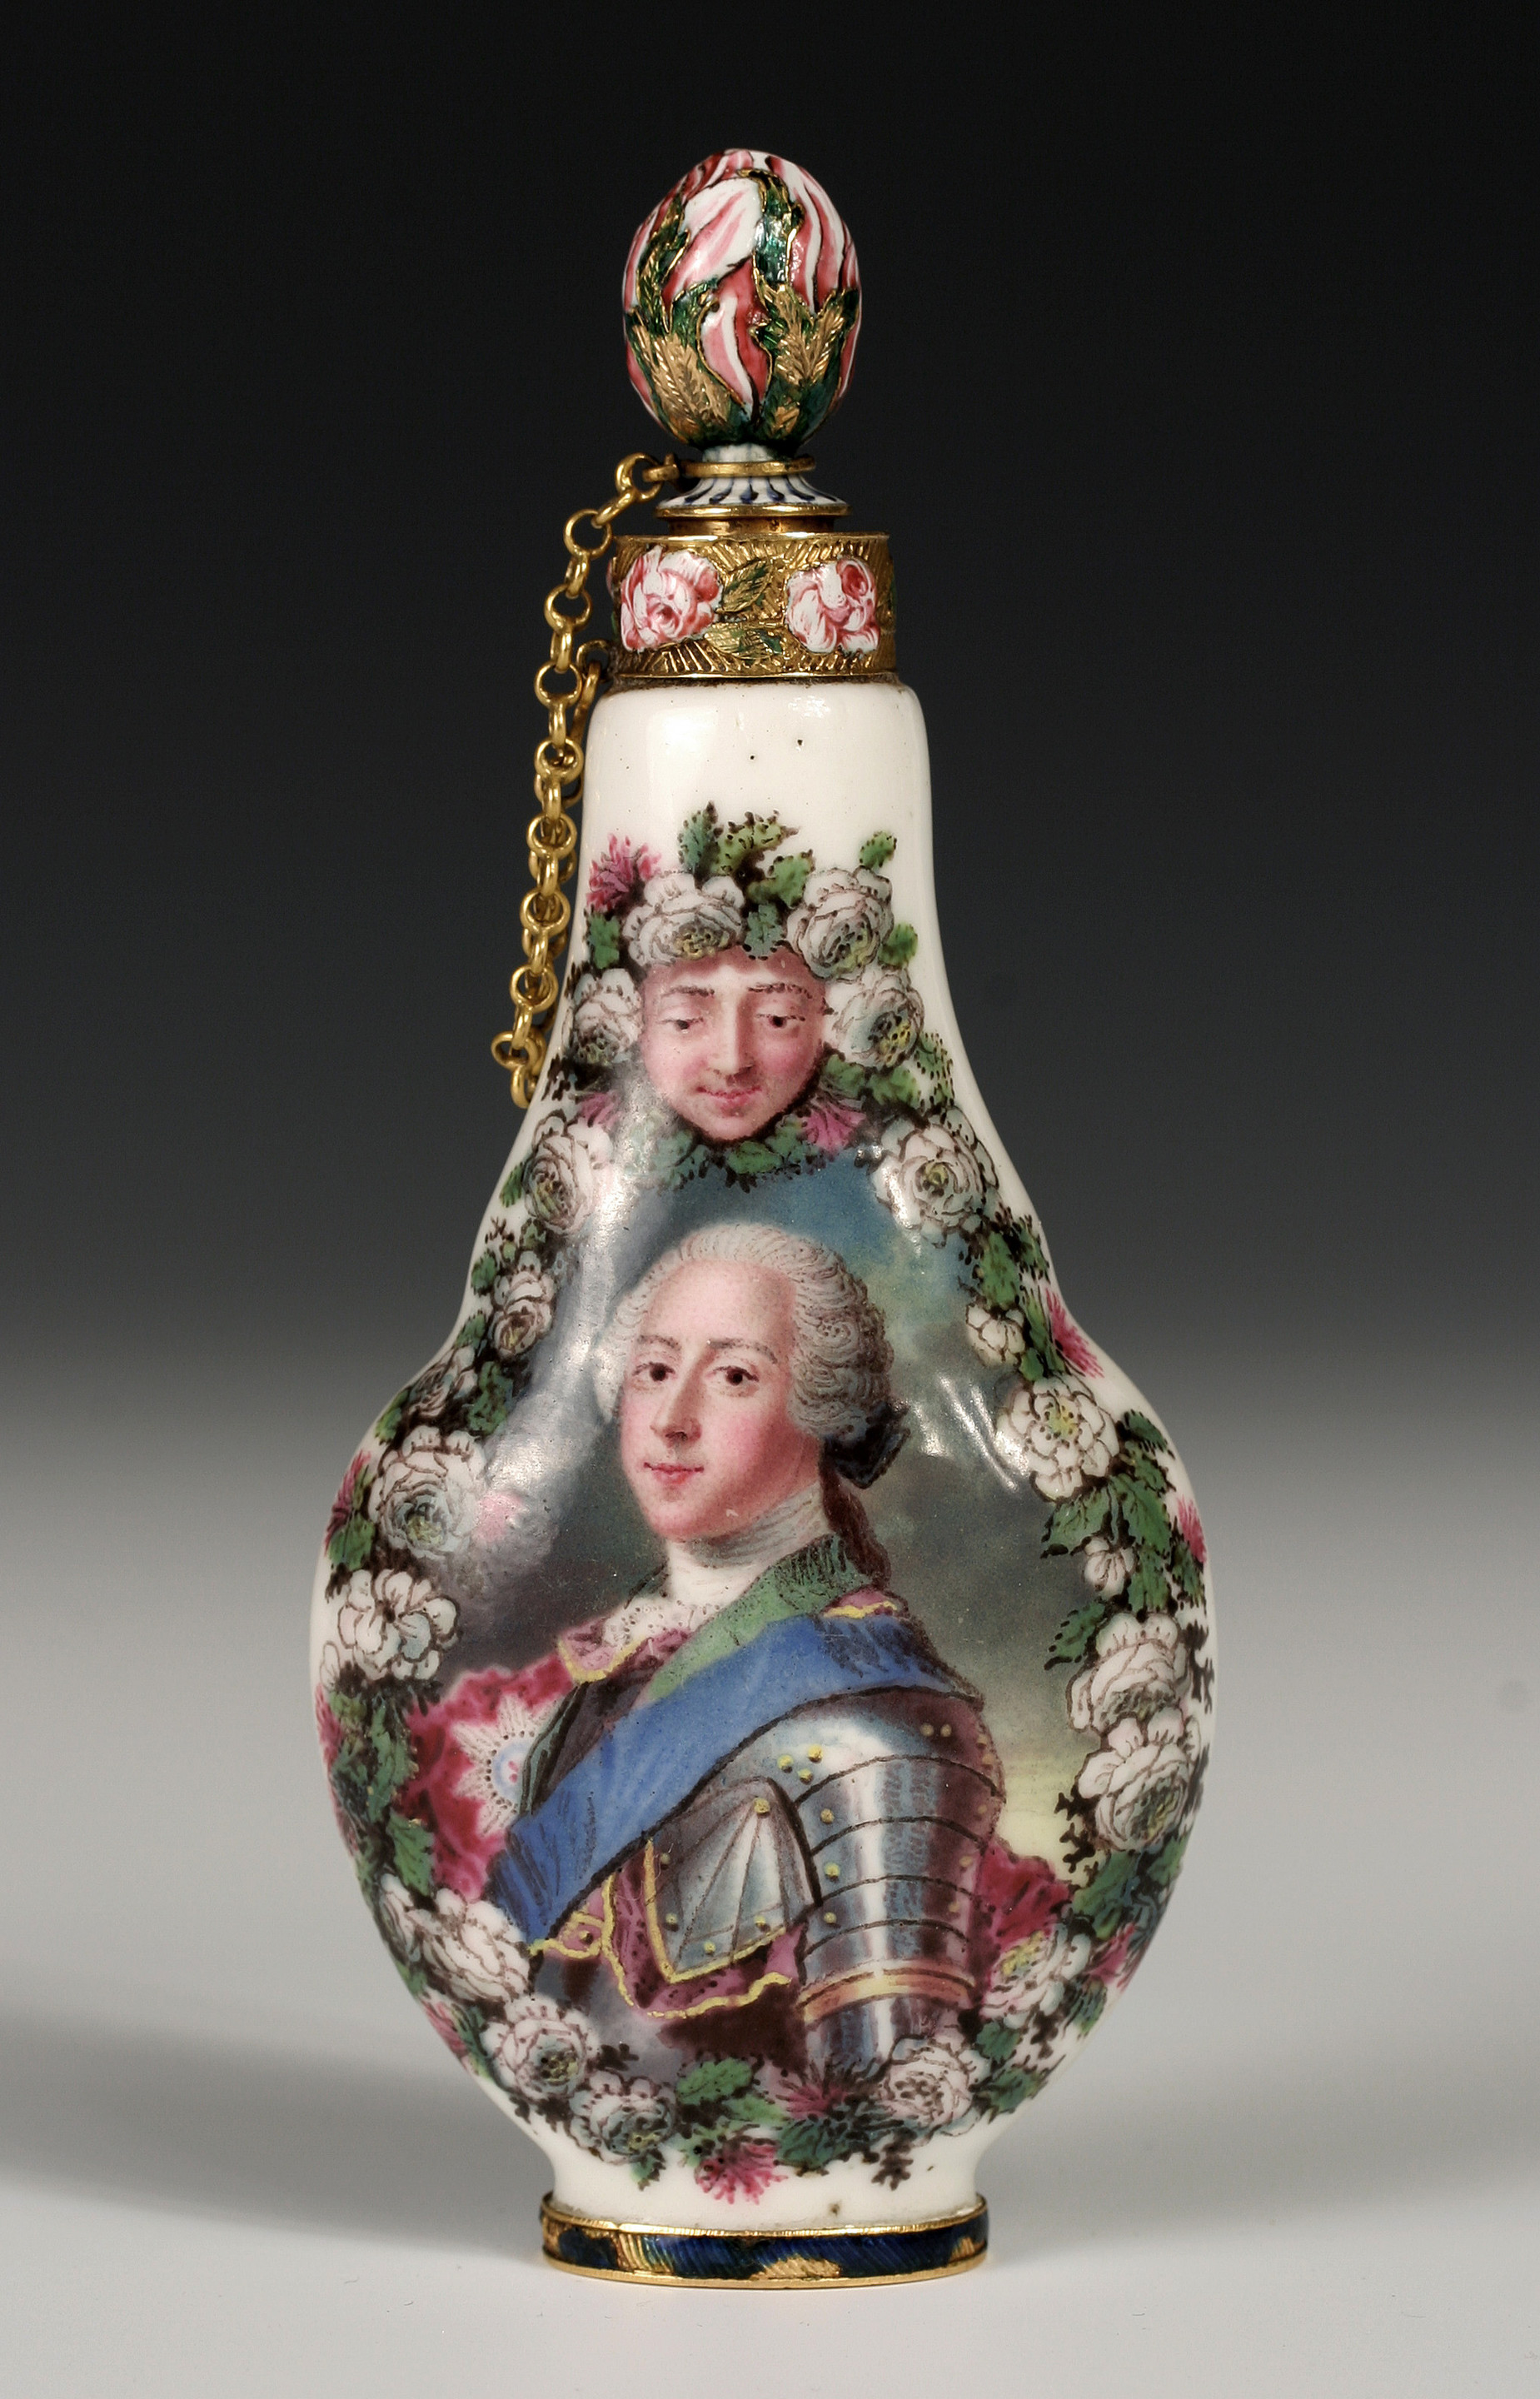 A Capodimonte gold and enamel-mounted scent bottle and stopper with a portrait of Prince Charles Edward Stuart (1720-88) and the arms of Lady Mary Hervey (née Leppel, 1700-68),